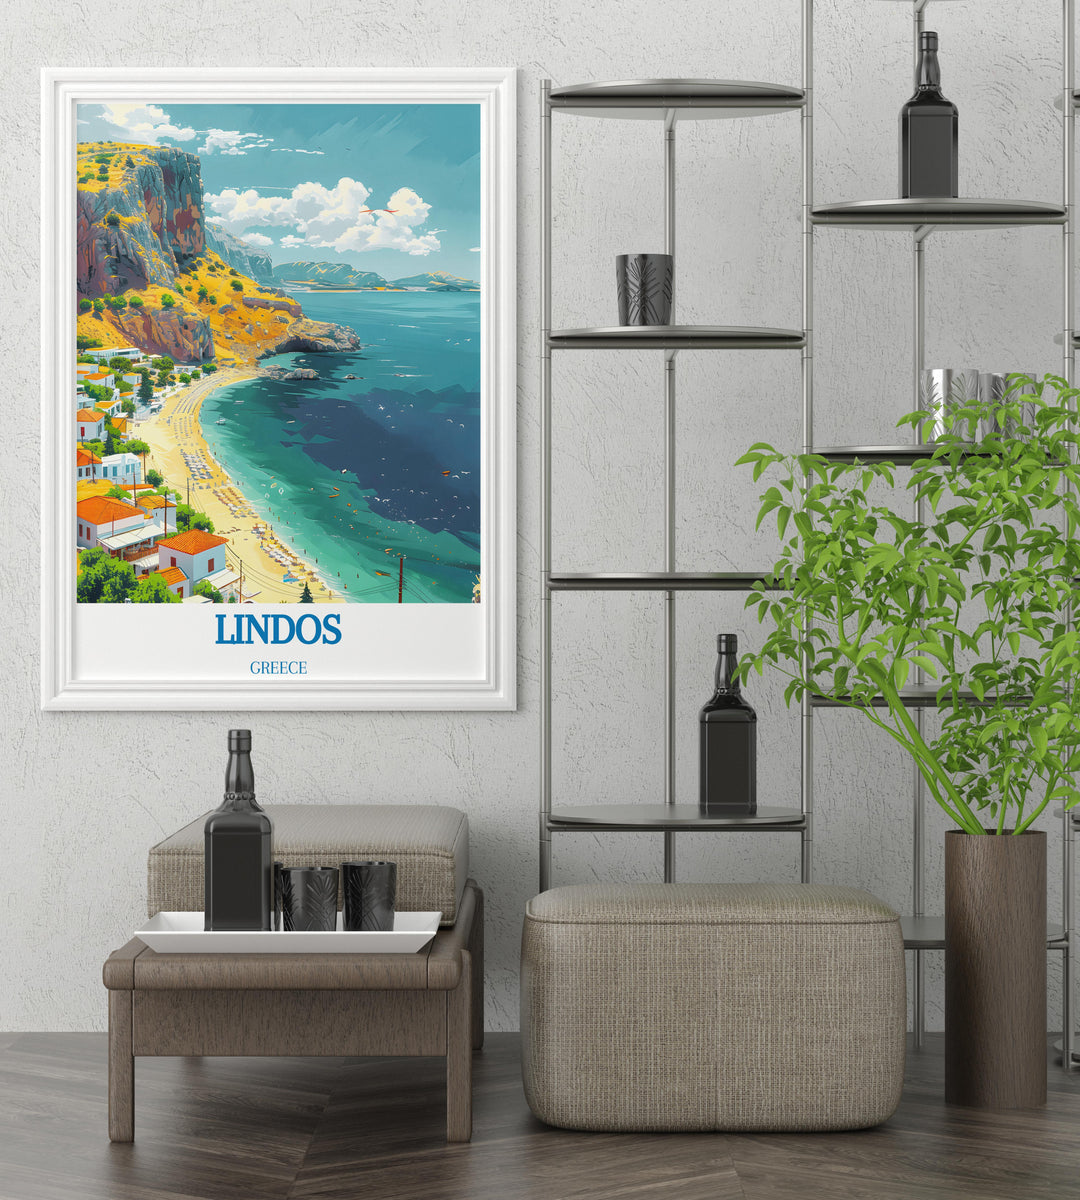 Customizable Greek island prints, allowing for personalized artwork of your favorite Lindos scenes.